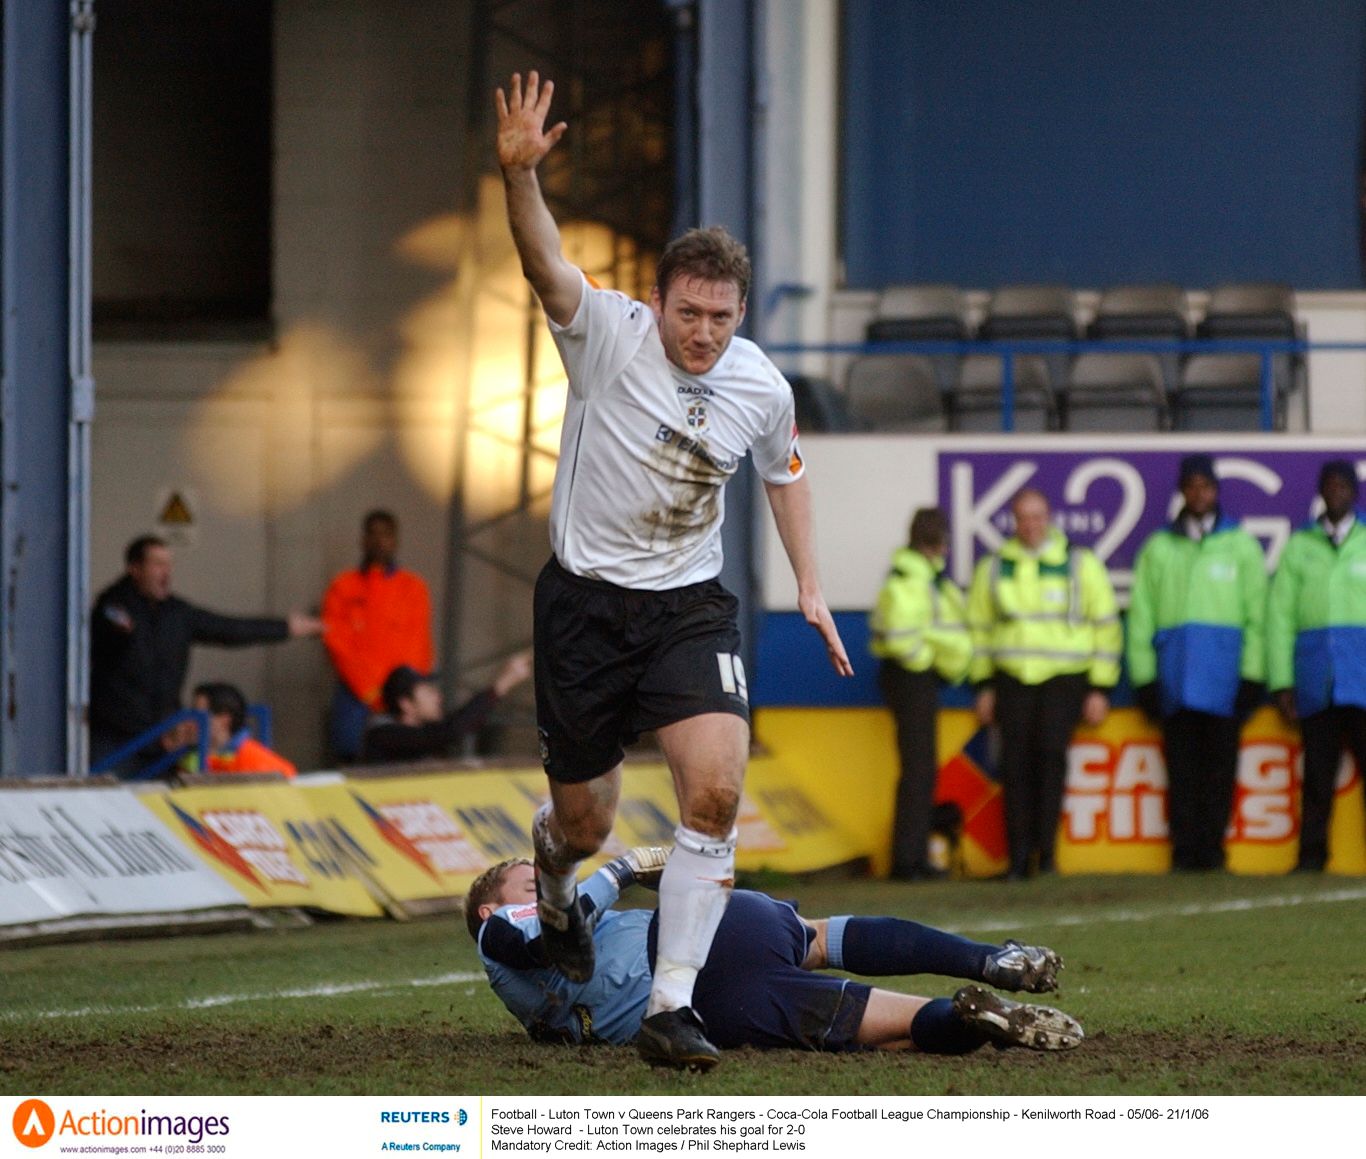 Football - Luton Town v Queens Park Rangers - Coca-Cola Football League Championship - Kenilworth Road - 05/06- 21/1/06 
Steve Howard  - Luton Town celebrates his goal for 2-0 
Mandatory Credit: Action Images / Phil Shephard Lewis